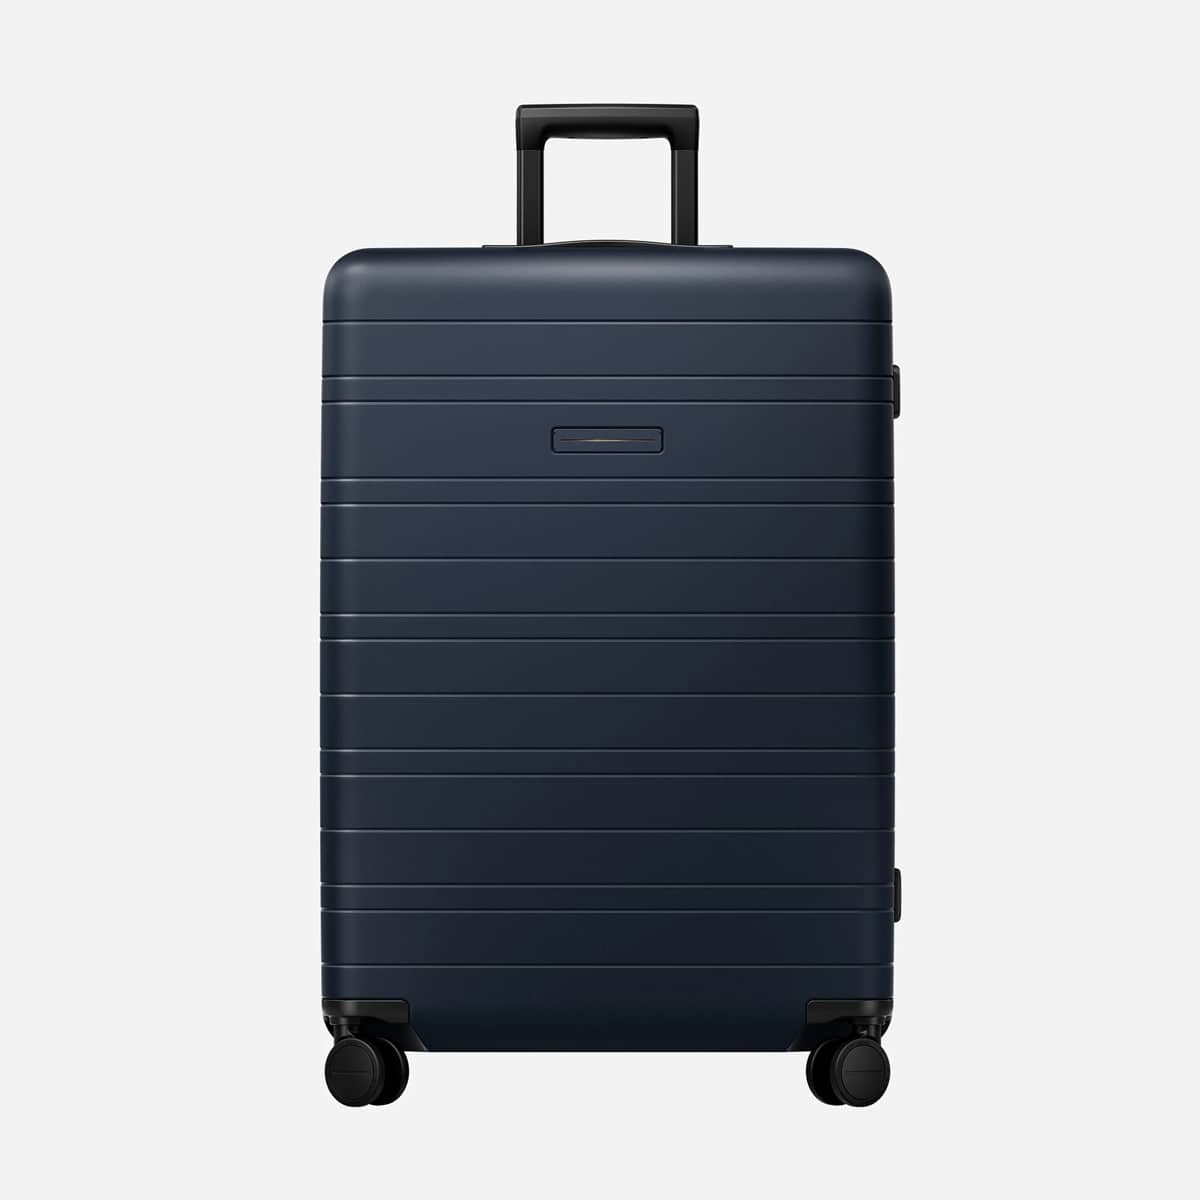 Best Checked Suitcase for Frequent Travelers